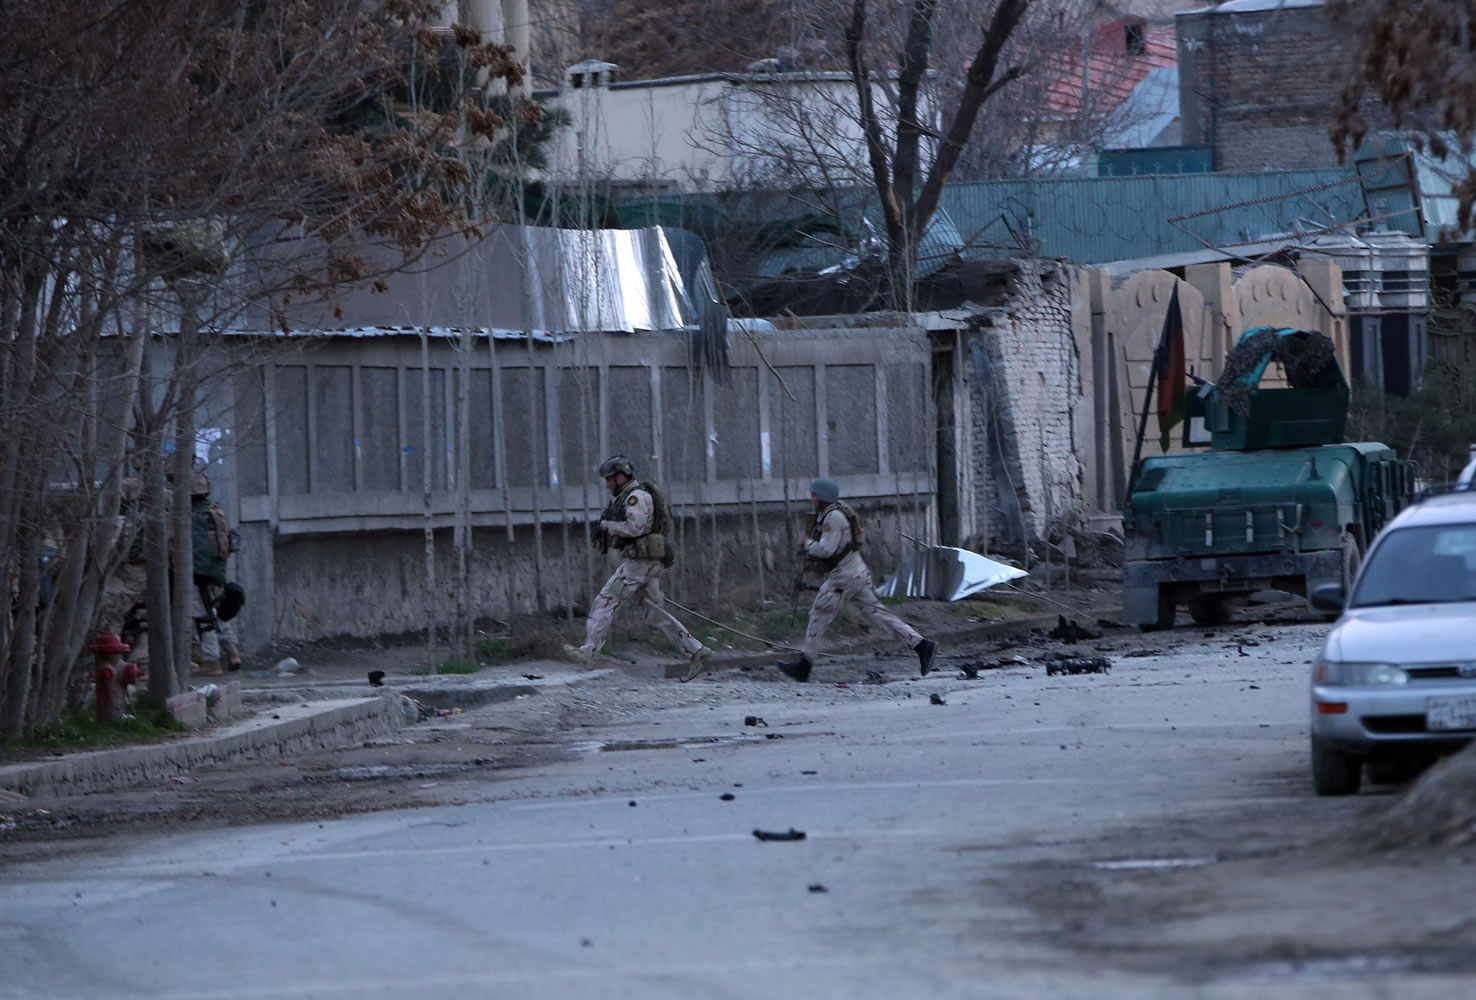 Afghan police and special forces run Friday as they surround the area after four suicide bombers armed with assault rifles and hand grenades attacked an &quot;office of foreigners&quot; in a southwestern neighborhood of Kabul, Afghanistan.